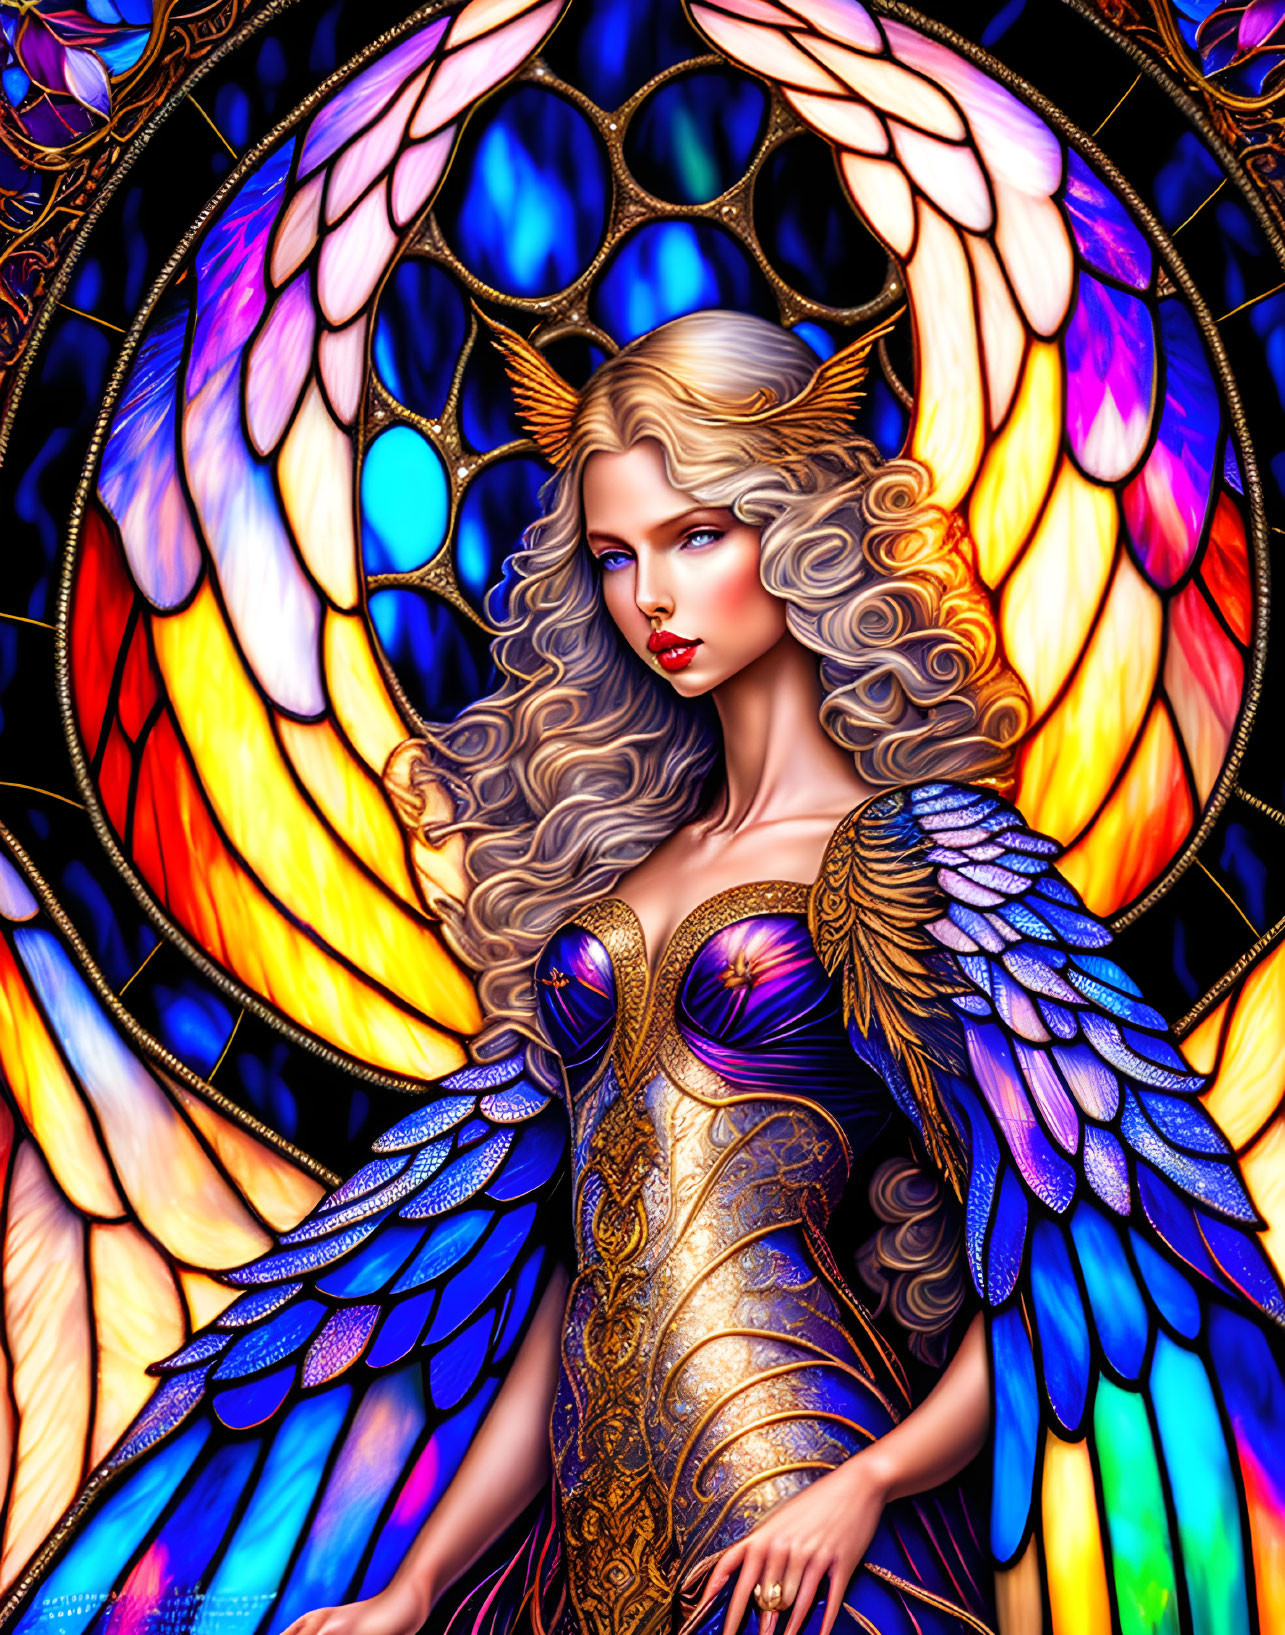 Majestic winged woman in golden armor against stained-glass backdrop